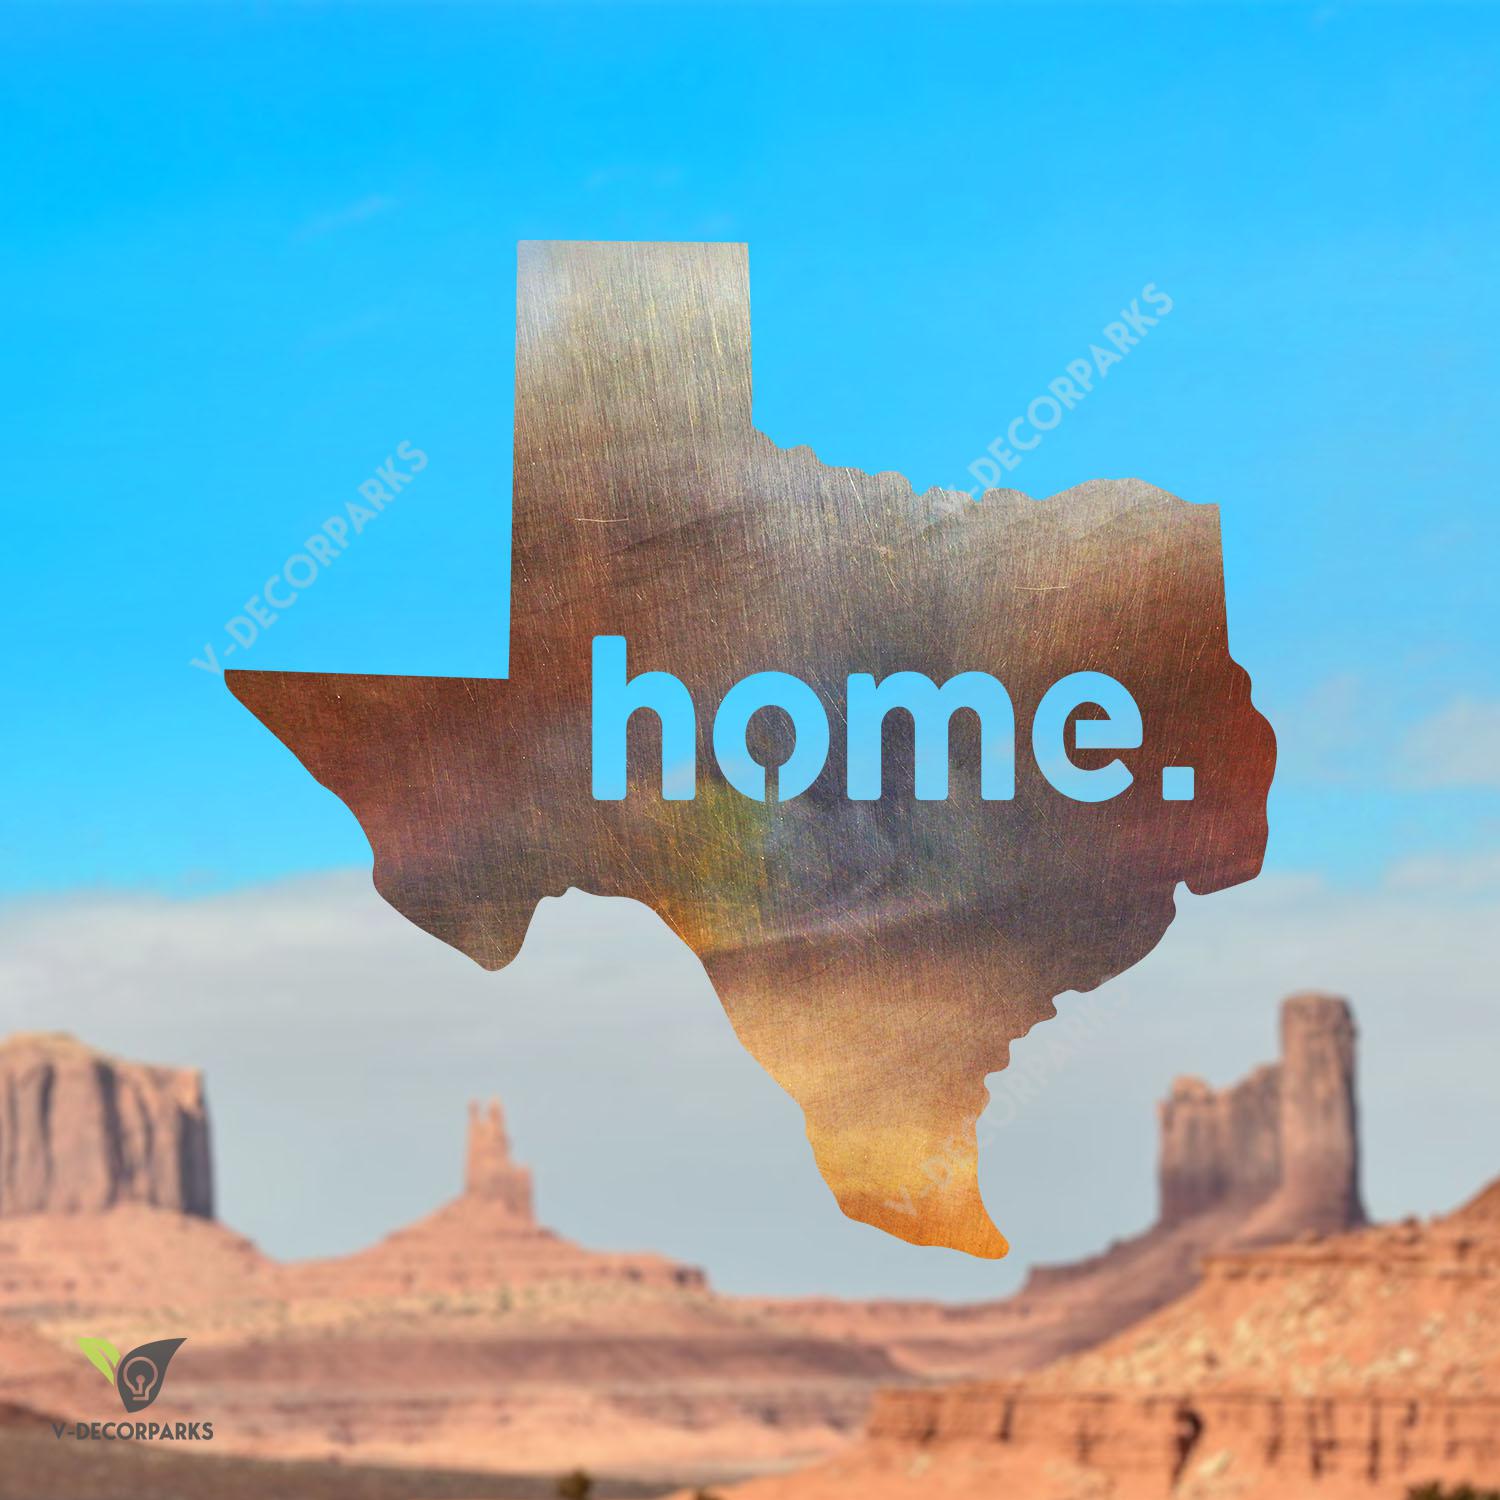 Home Texas Heat Treated Color Metal Sign, Home Texas Porch Wall Hanging